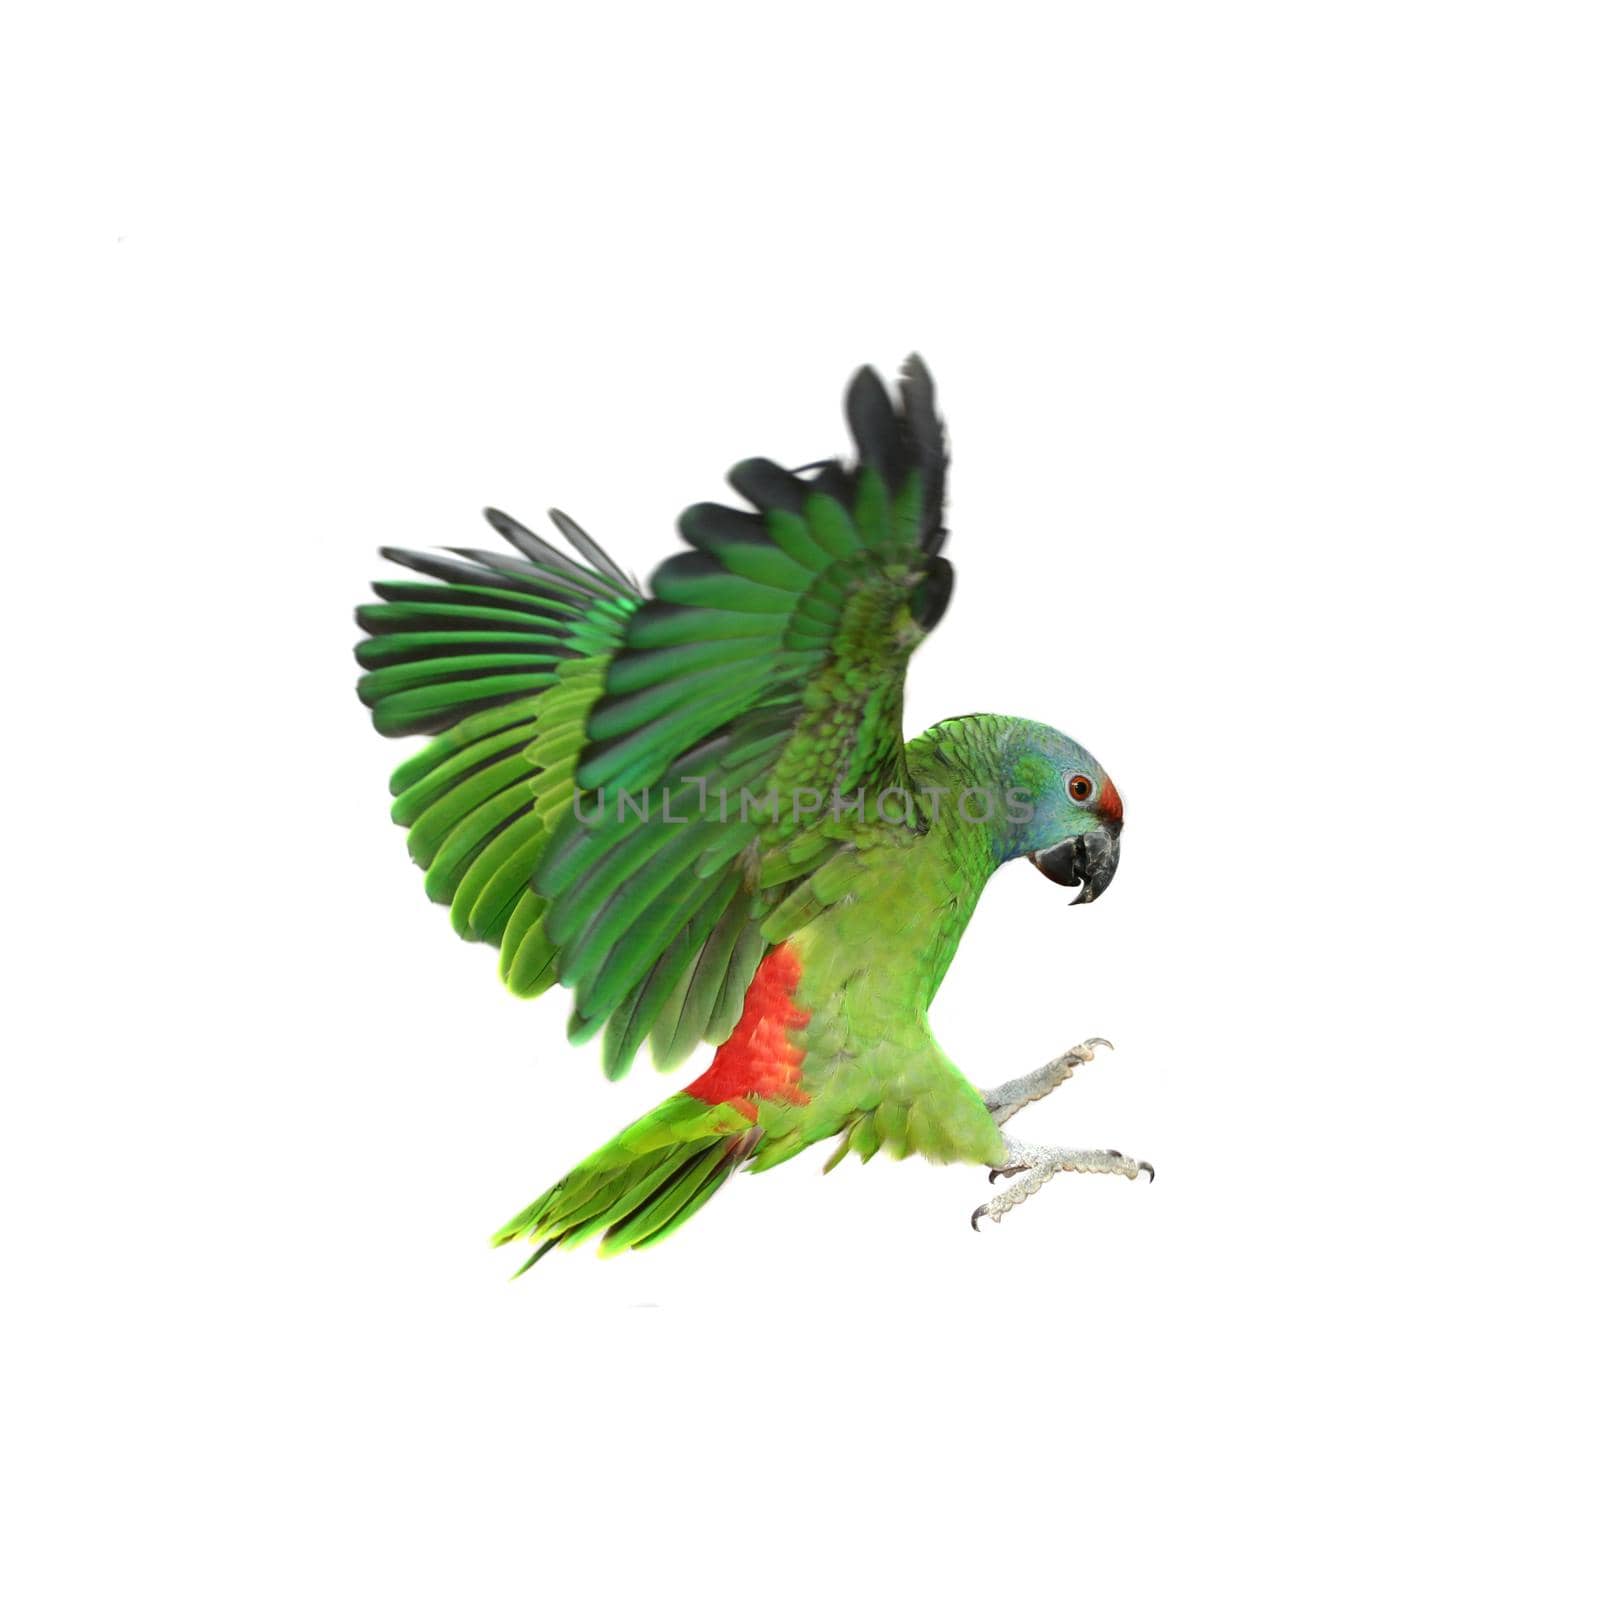 Flying festival Amazon parrot on white by RosaJay